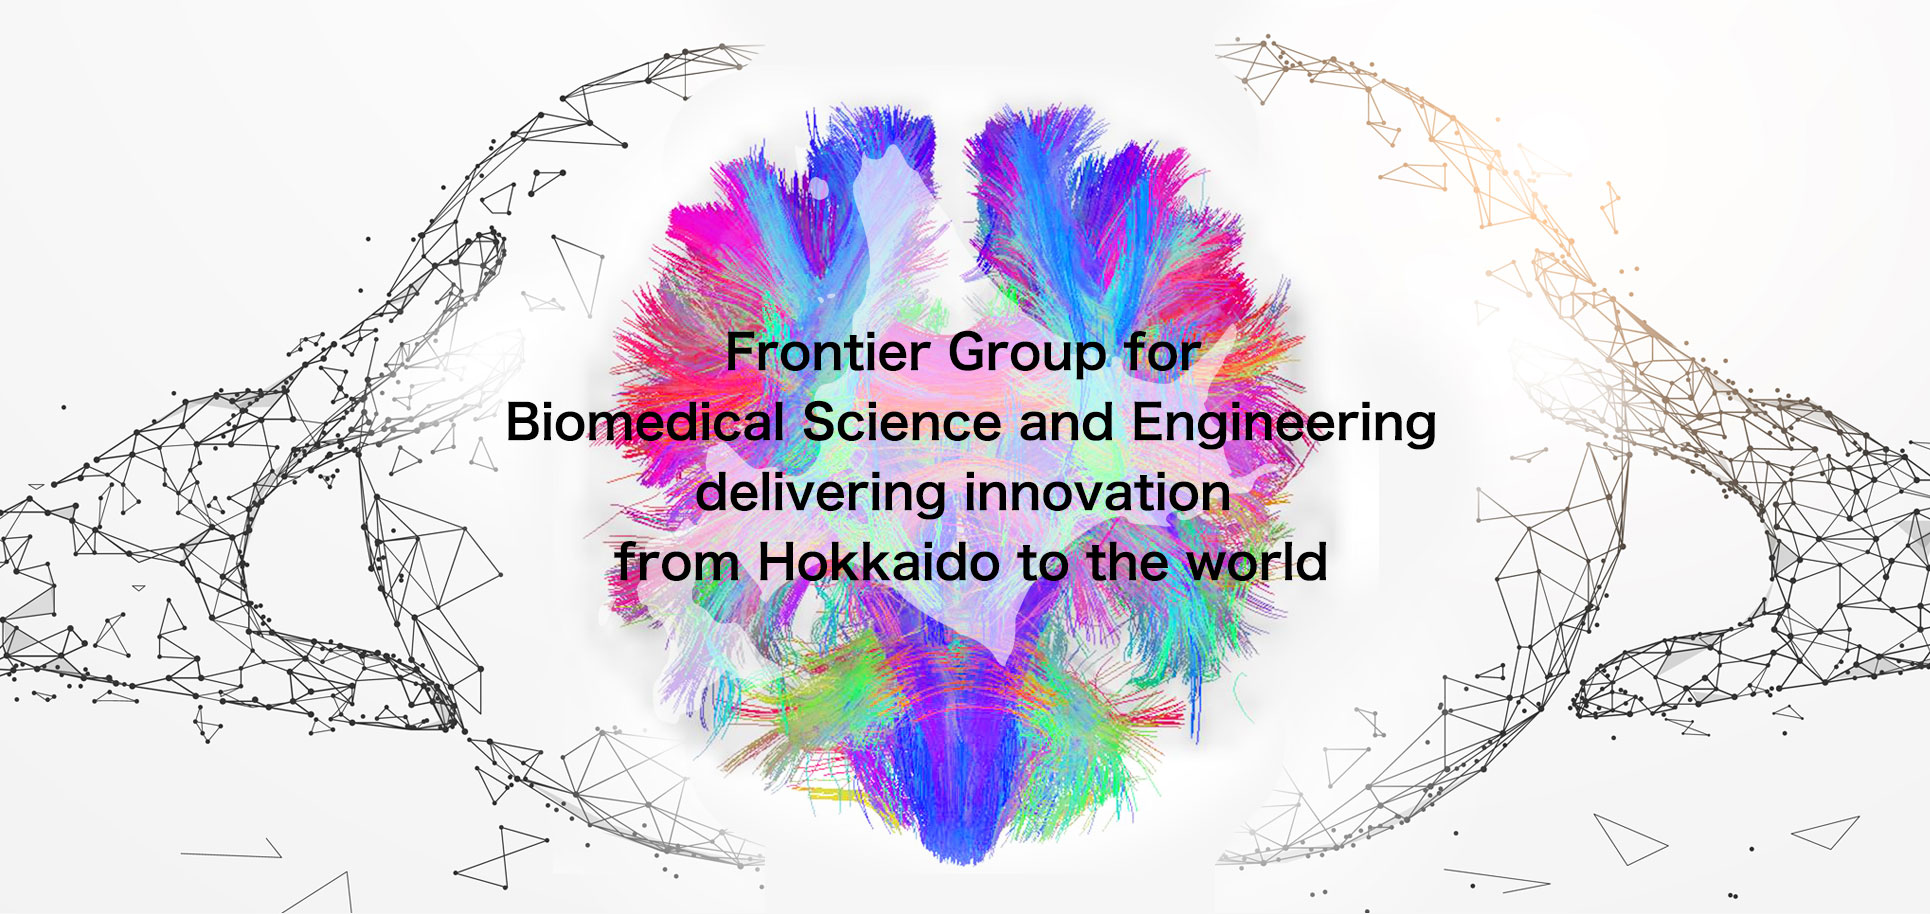 Frontier Group for Biomedical Science and Engineering delivering innovation from Hokkaido to the world